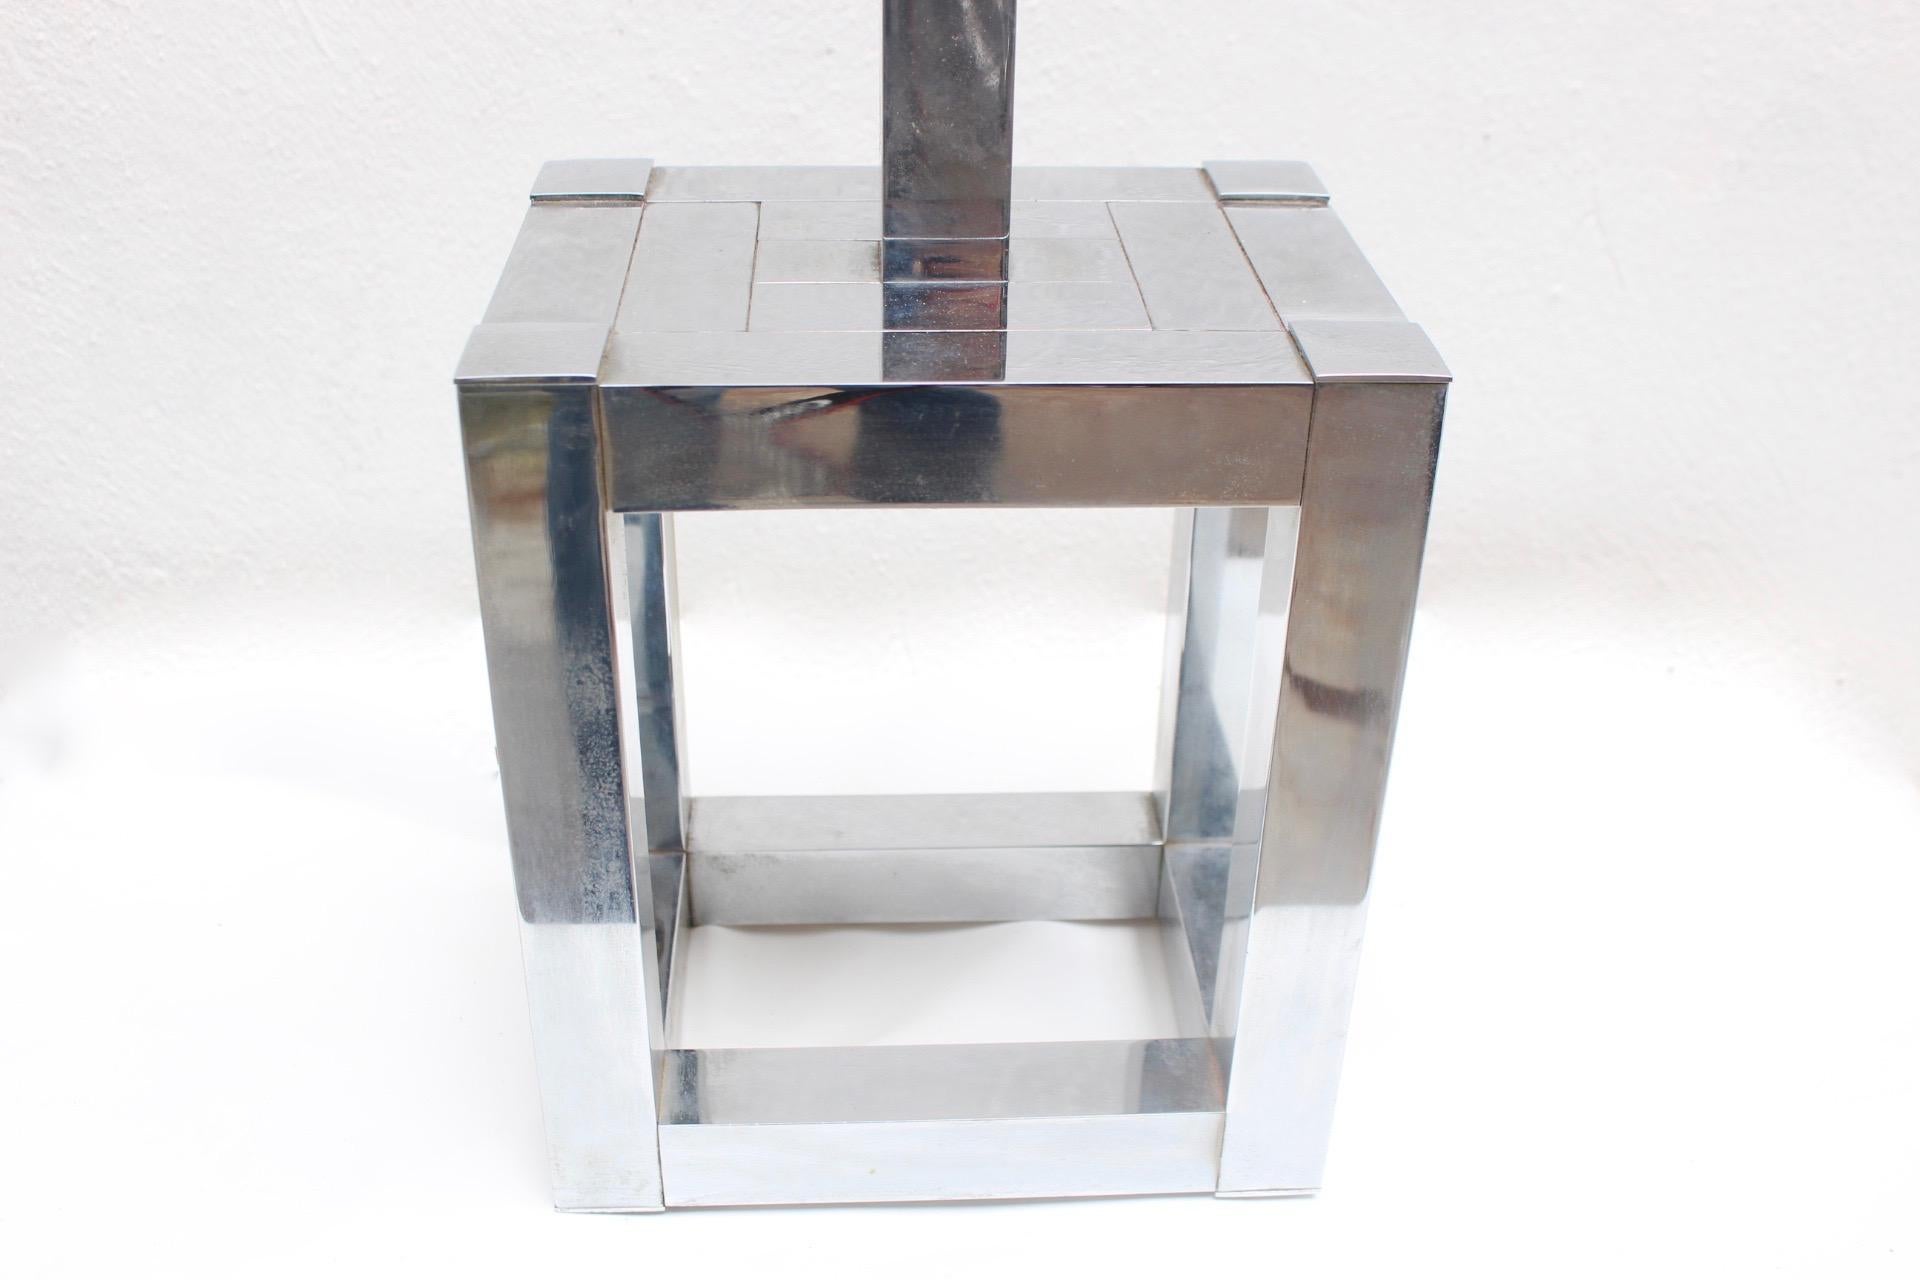 Midcentury Willy Rizzo Sculptural Cubic Sculptural Table Lamp for Lumica, 1970s For Sale 2